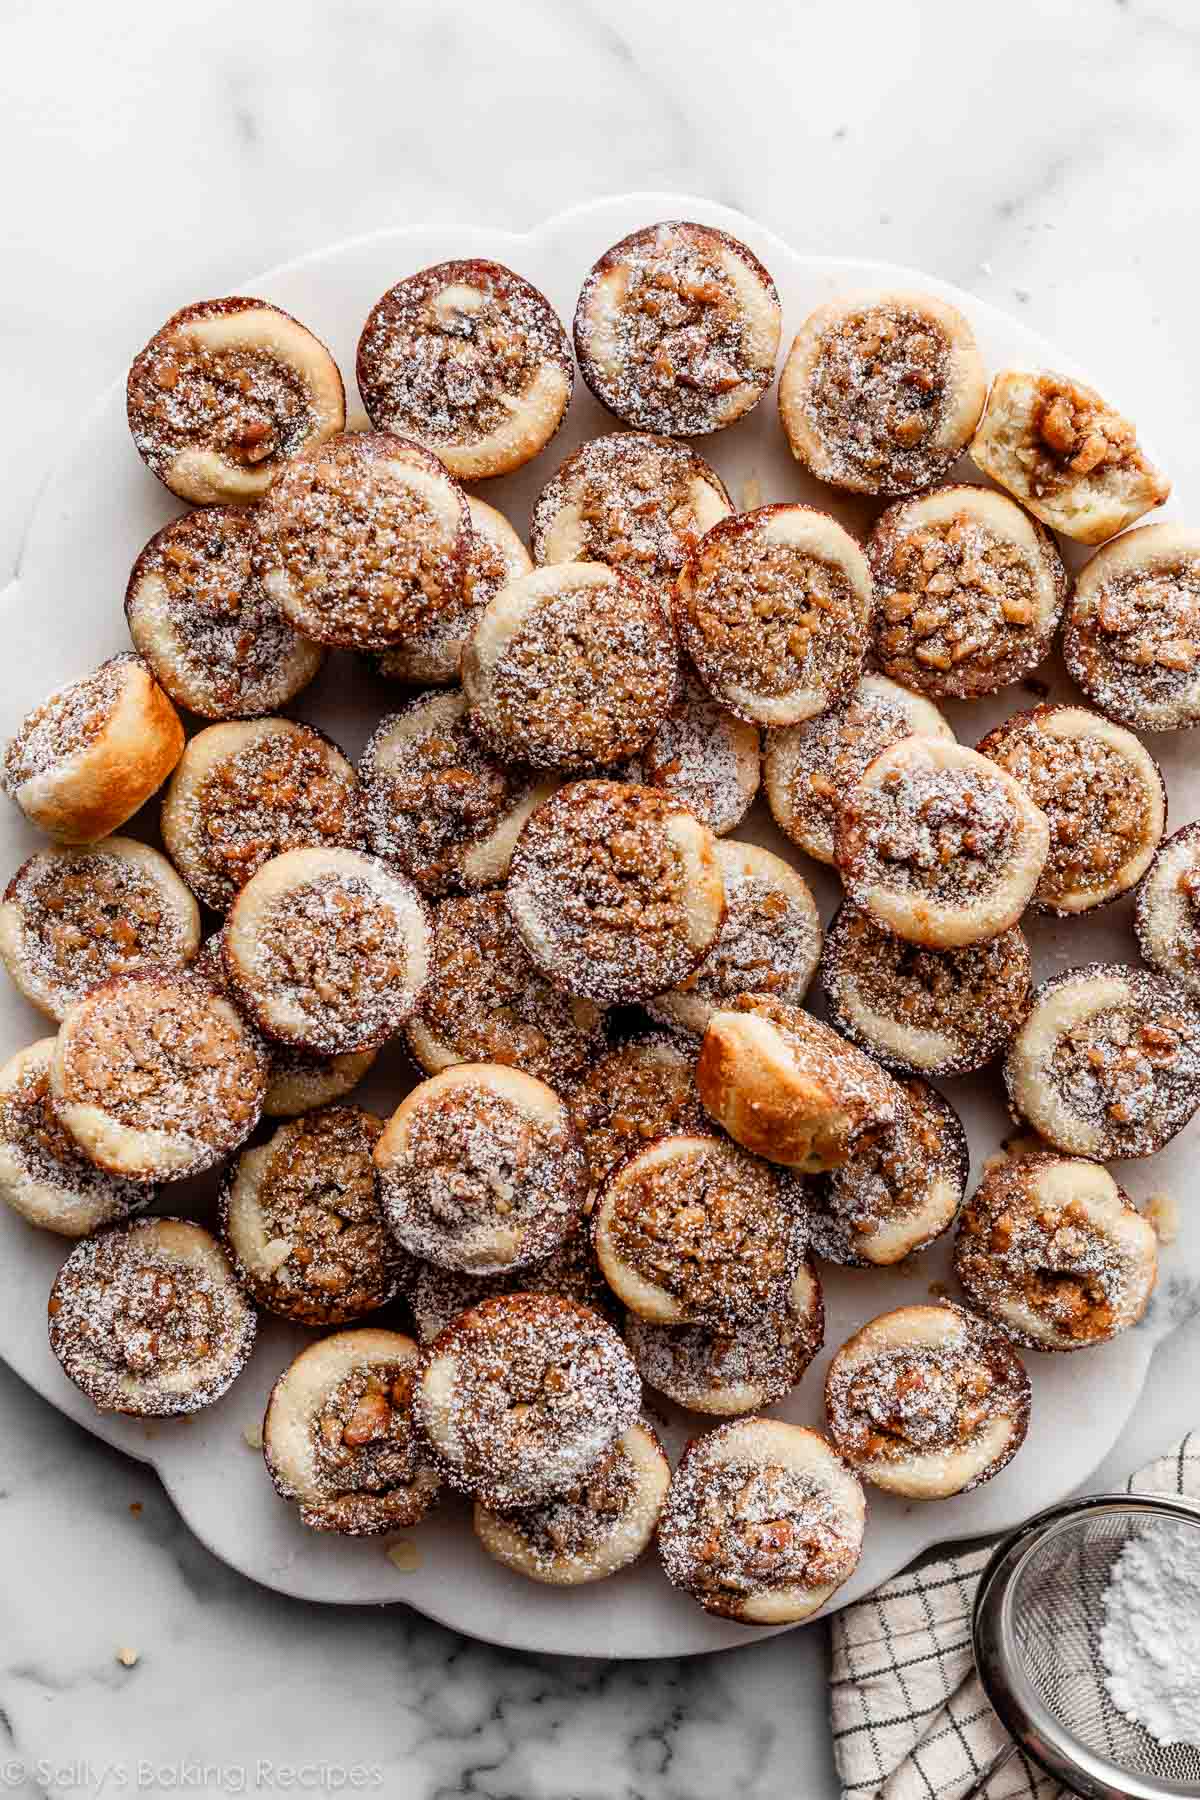 maple walnut tassies with sprinkle of confectioners' sugar on top.